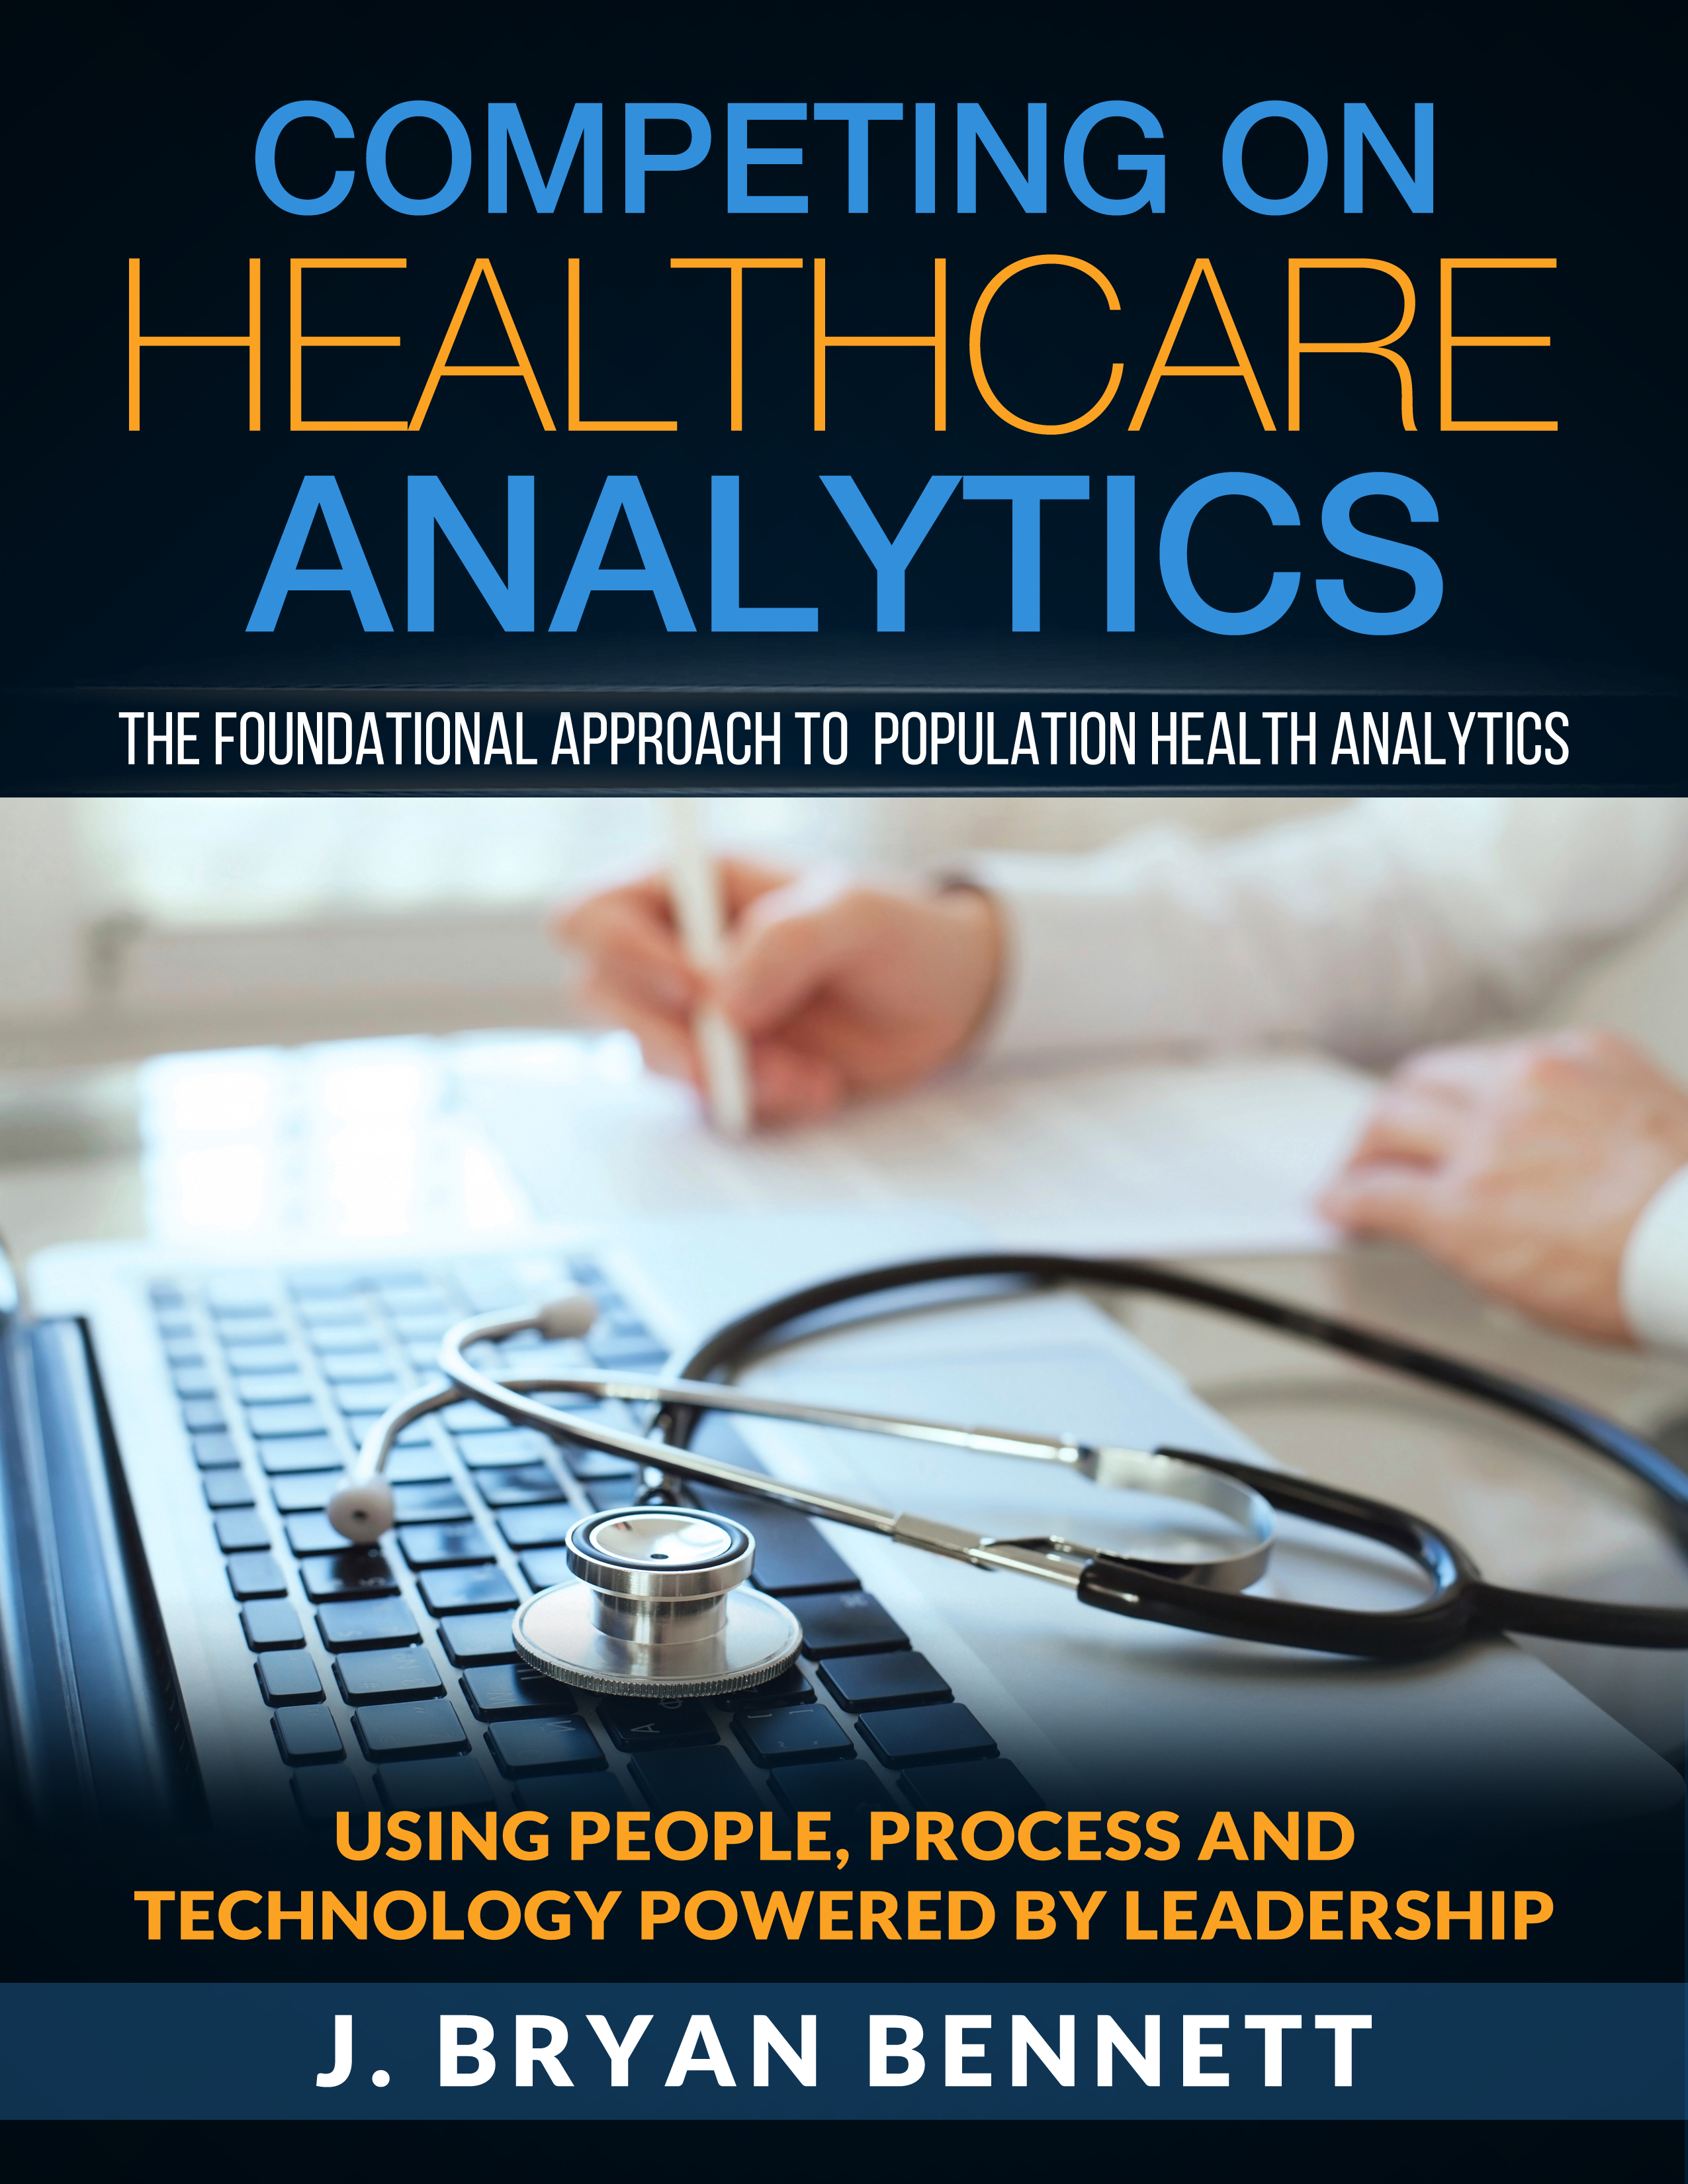 Healthcare Analytics Readiness Assessment - High Level